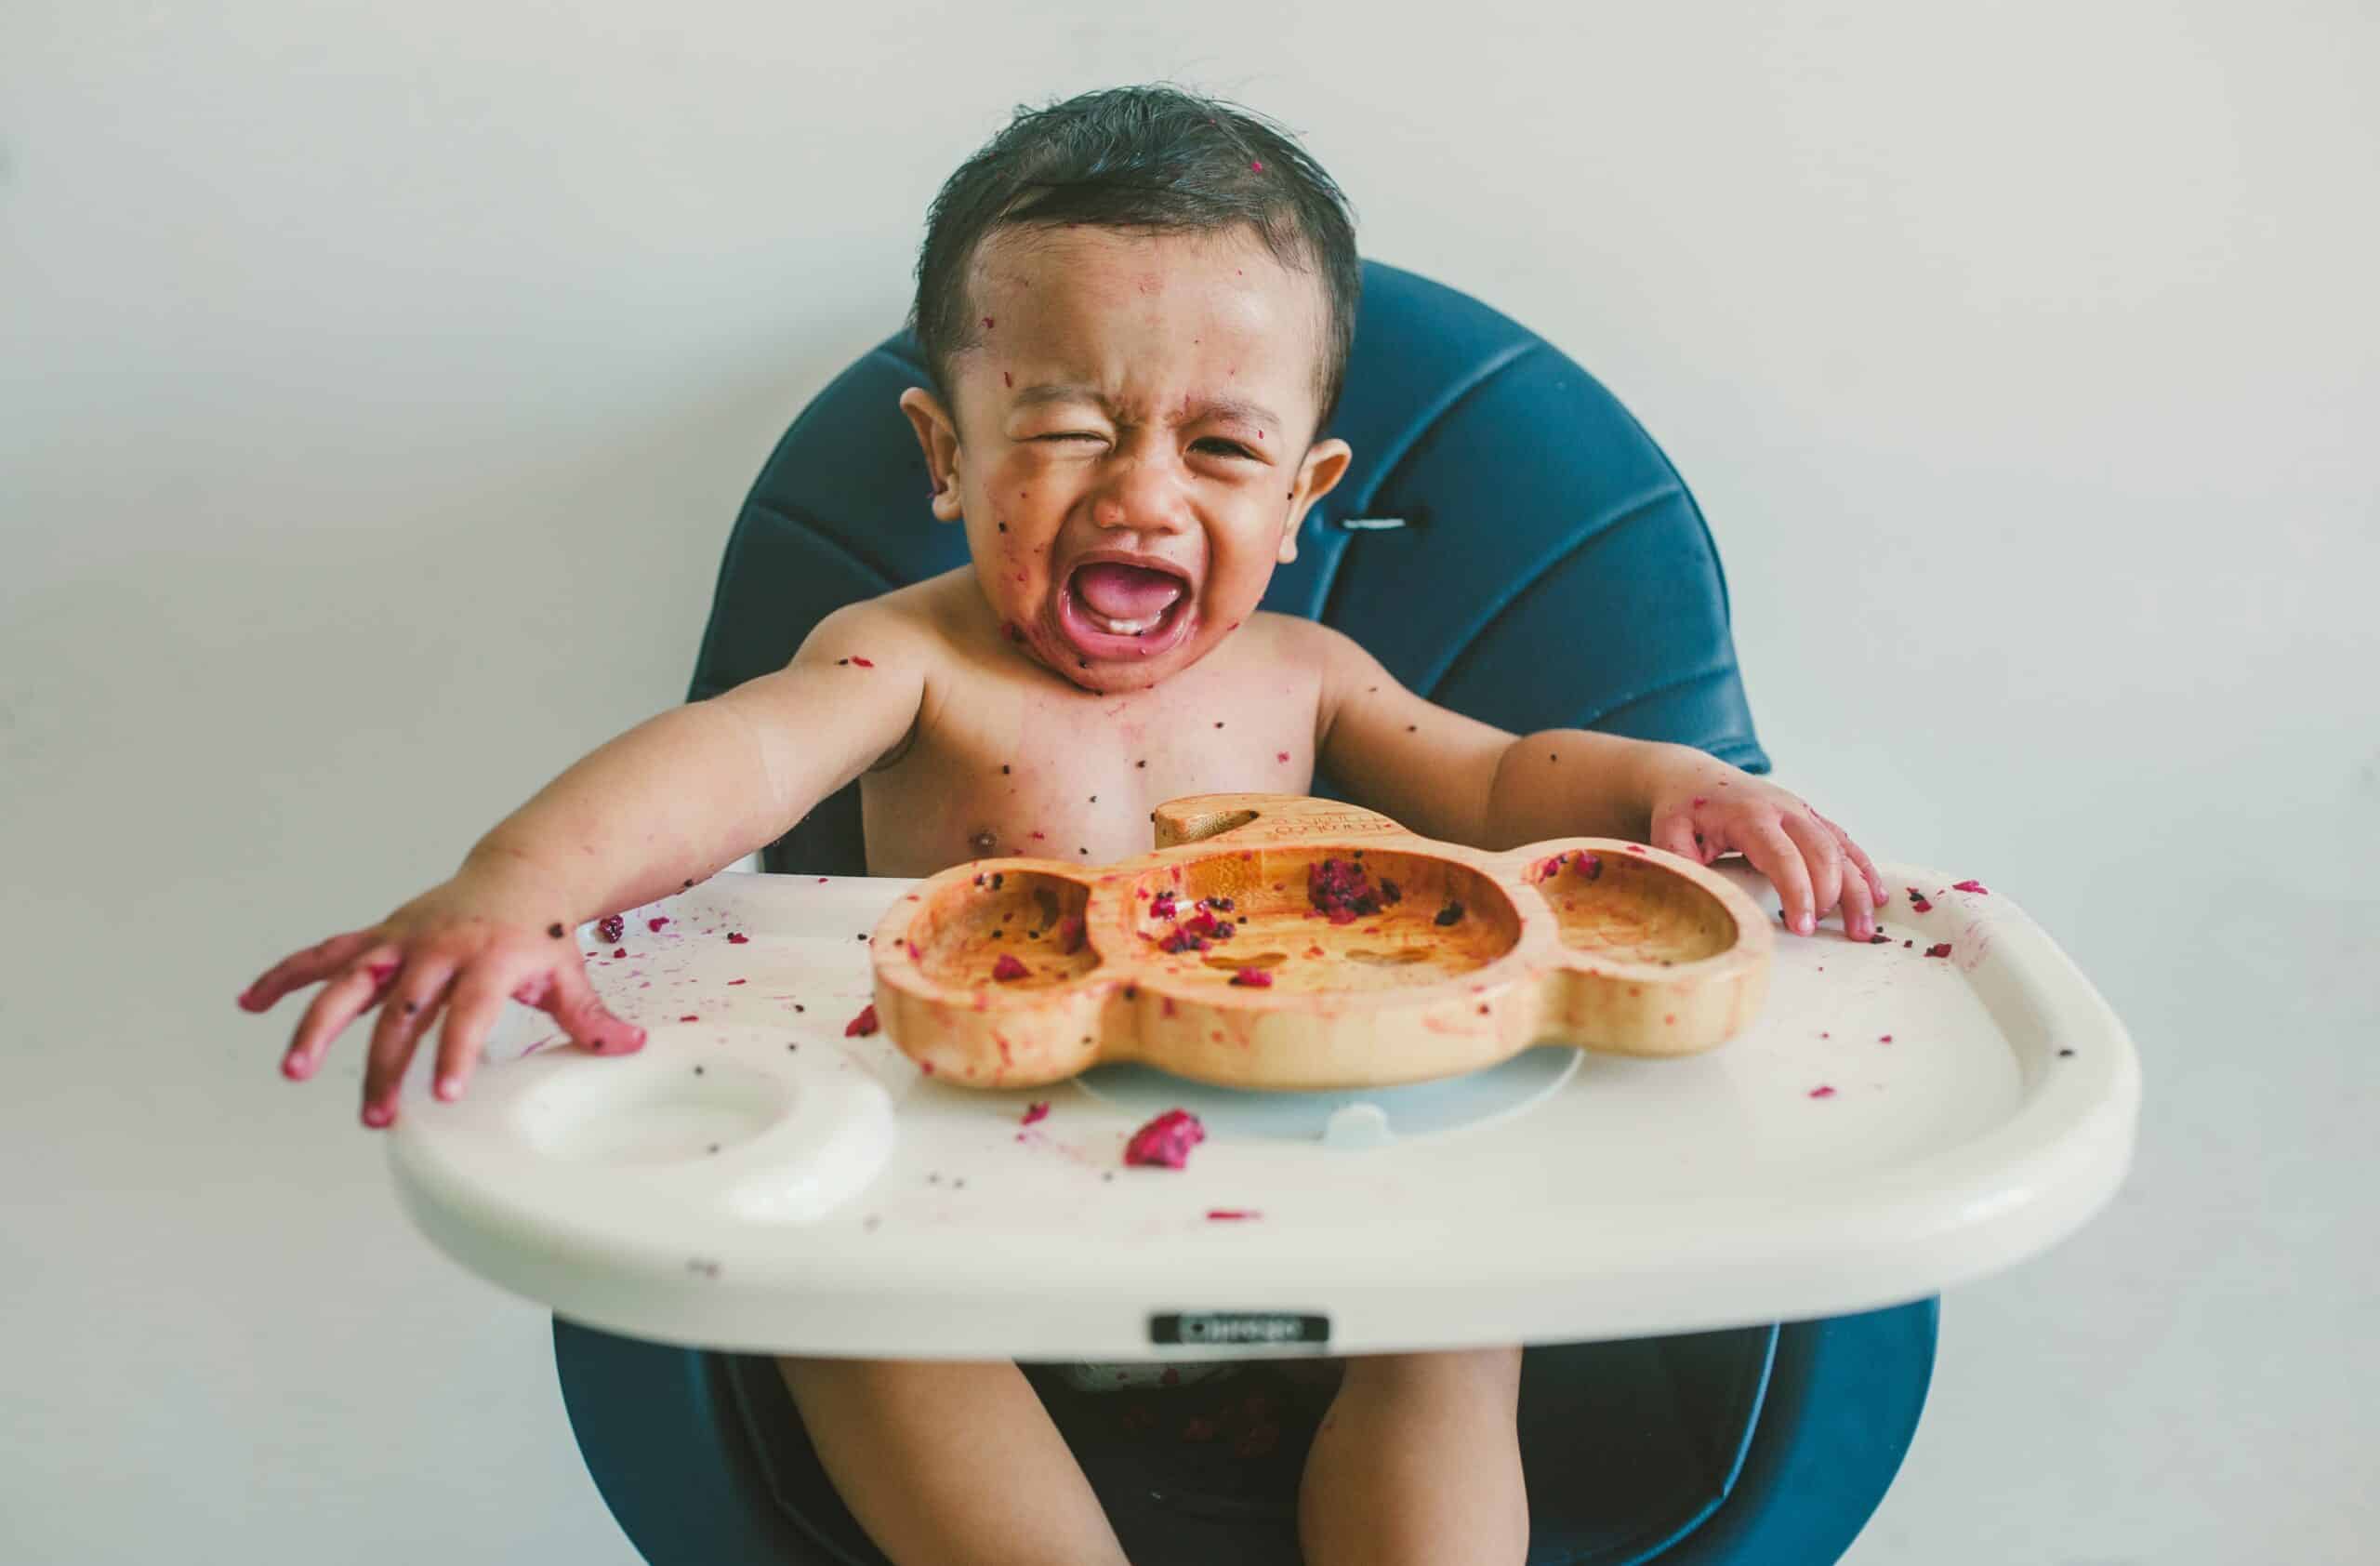 crying baby with eating difficulty